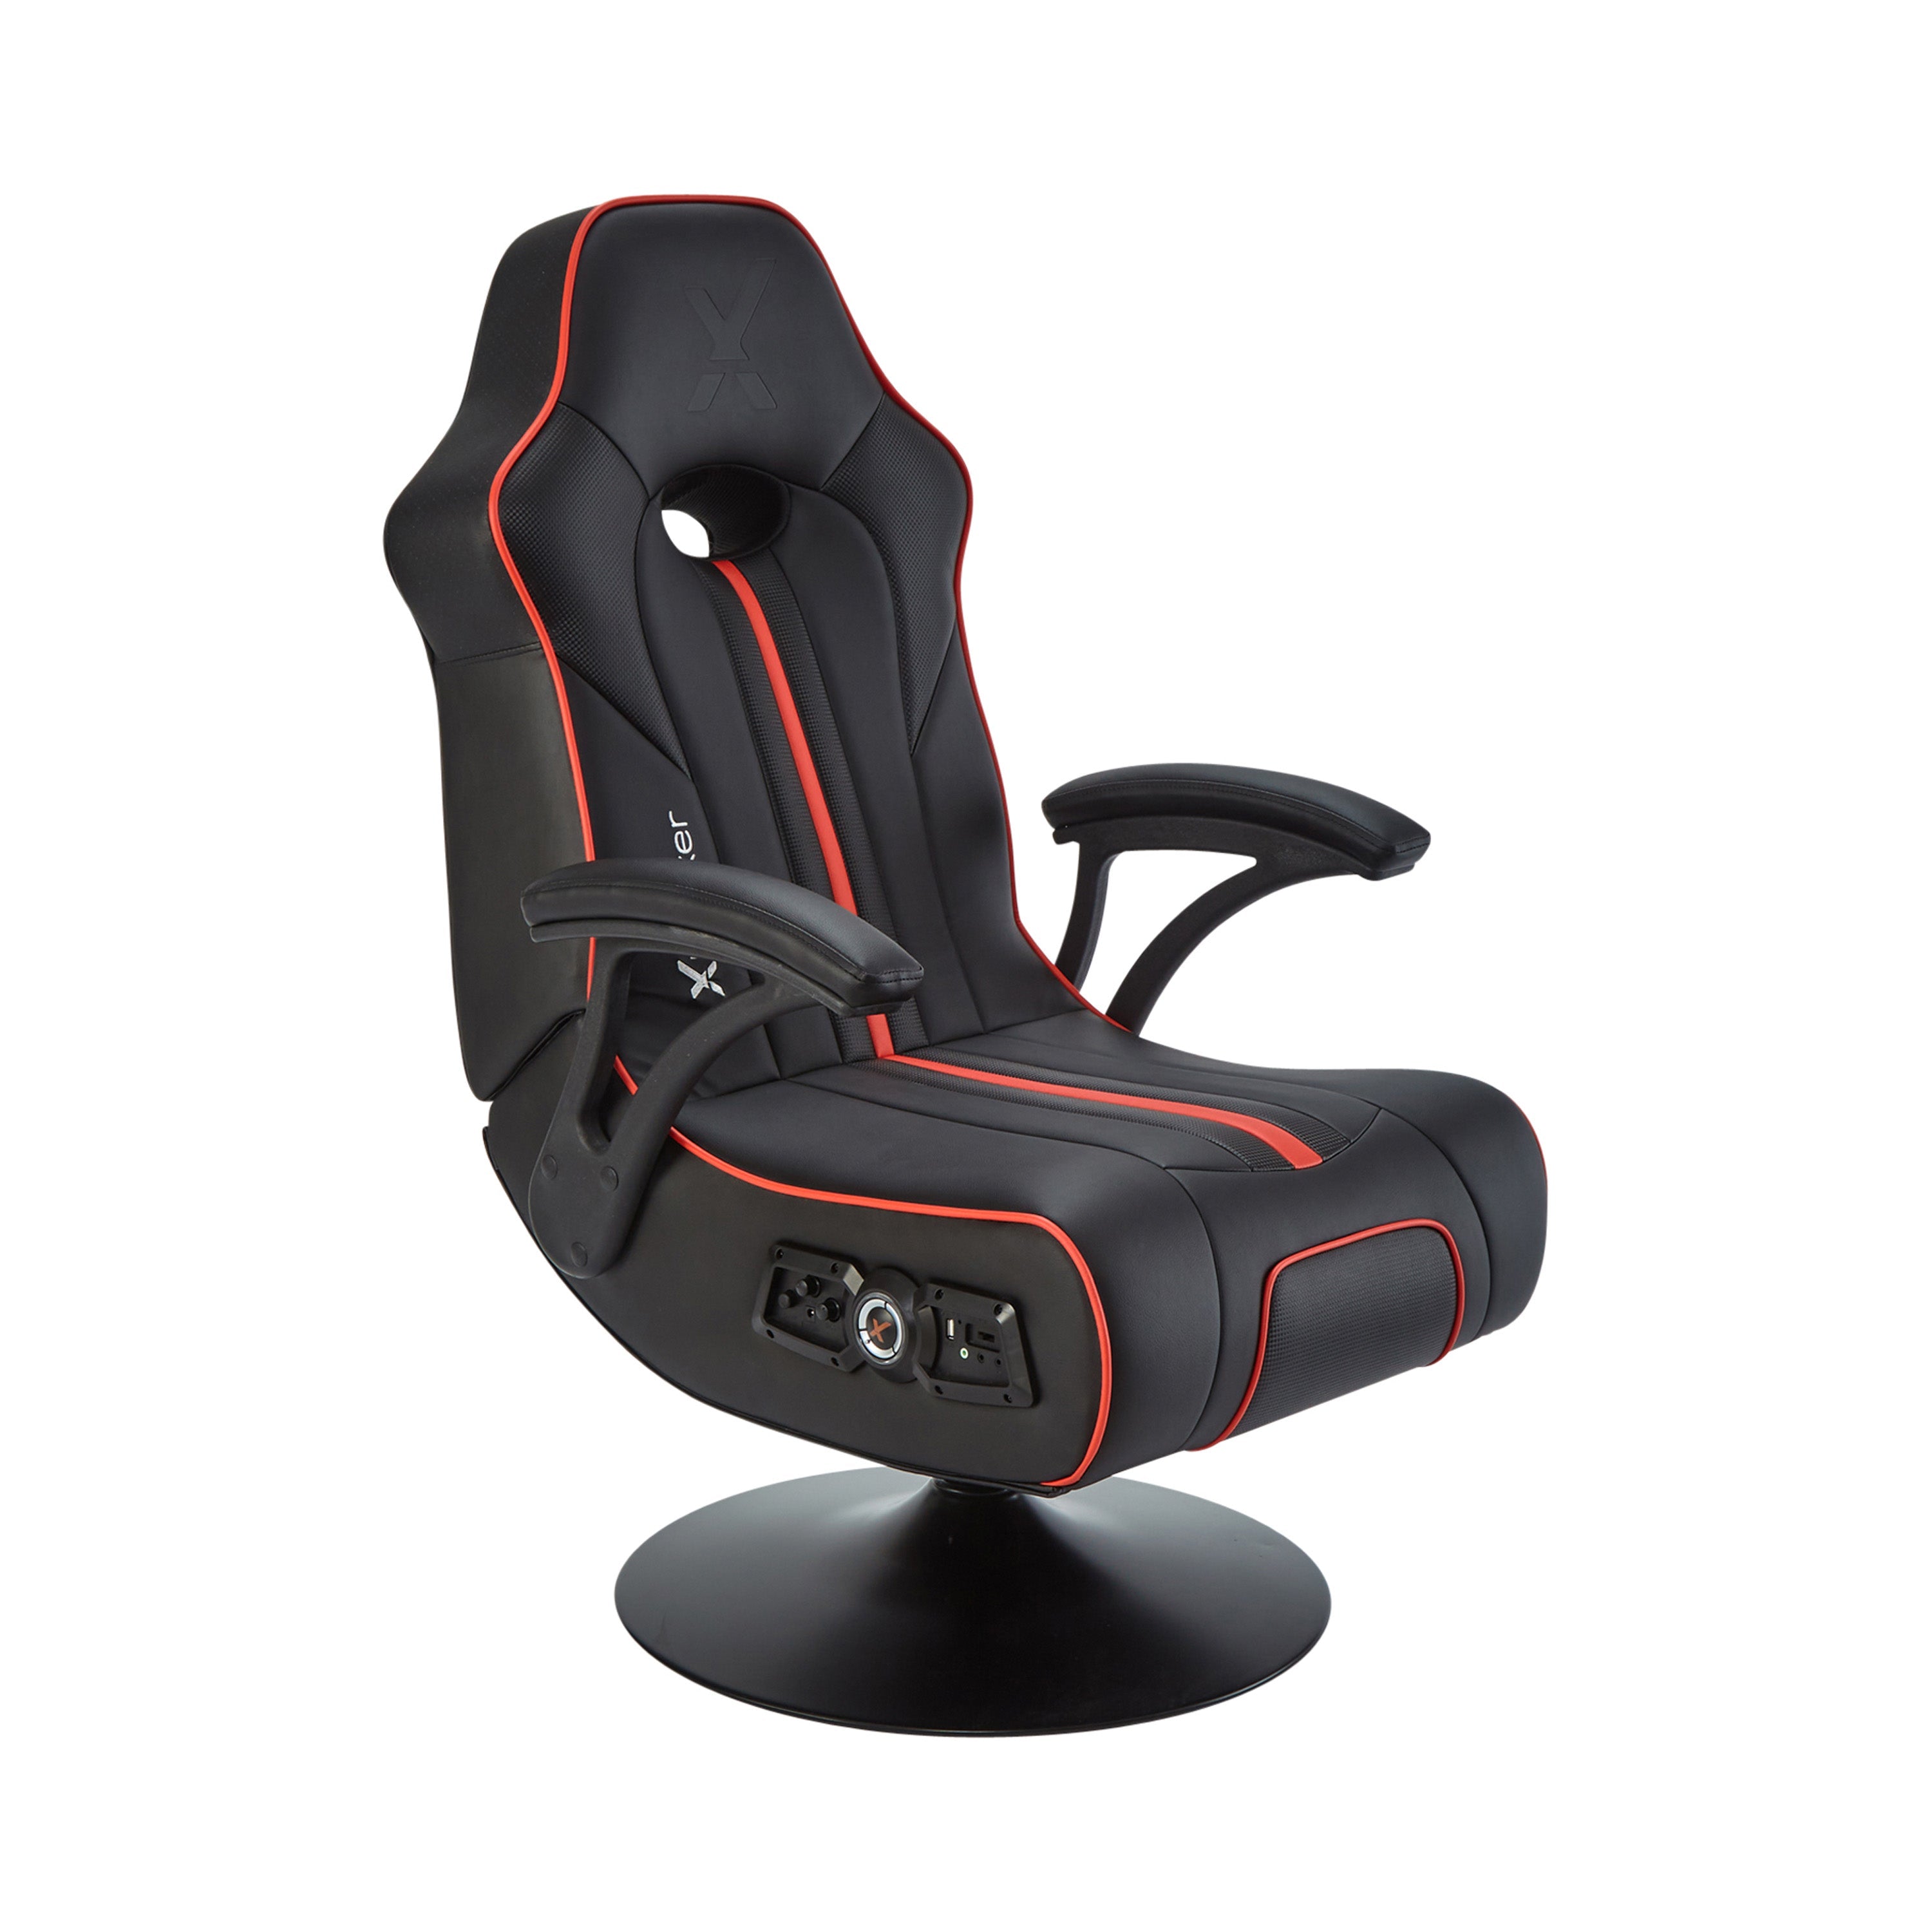 Torque Bluetooth Audio Pedestal Gaming Chair with Subwoofer and Vibration, Black/Red